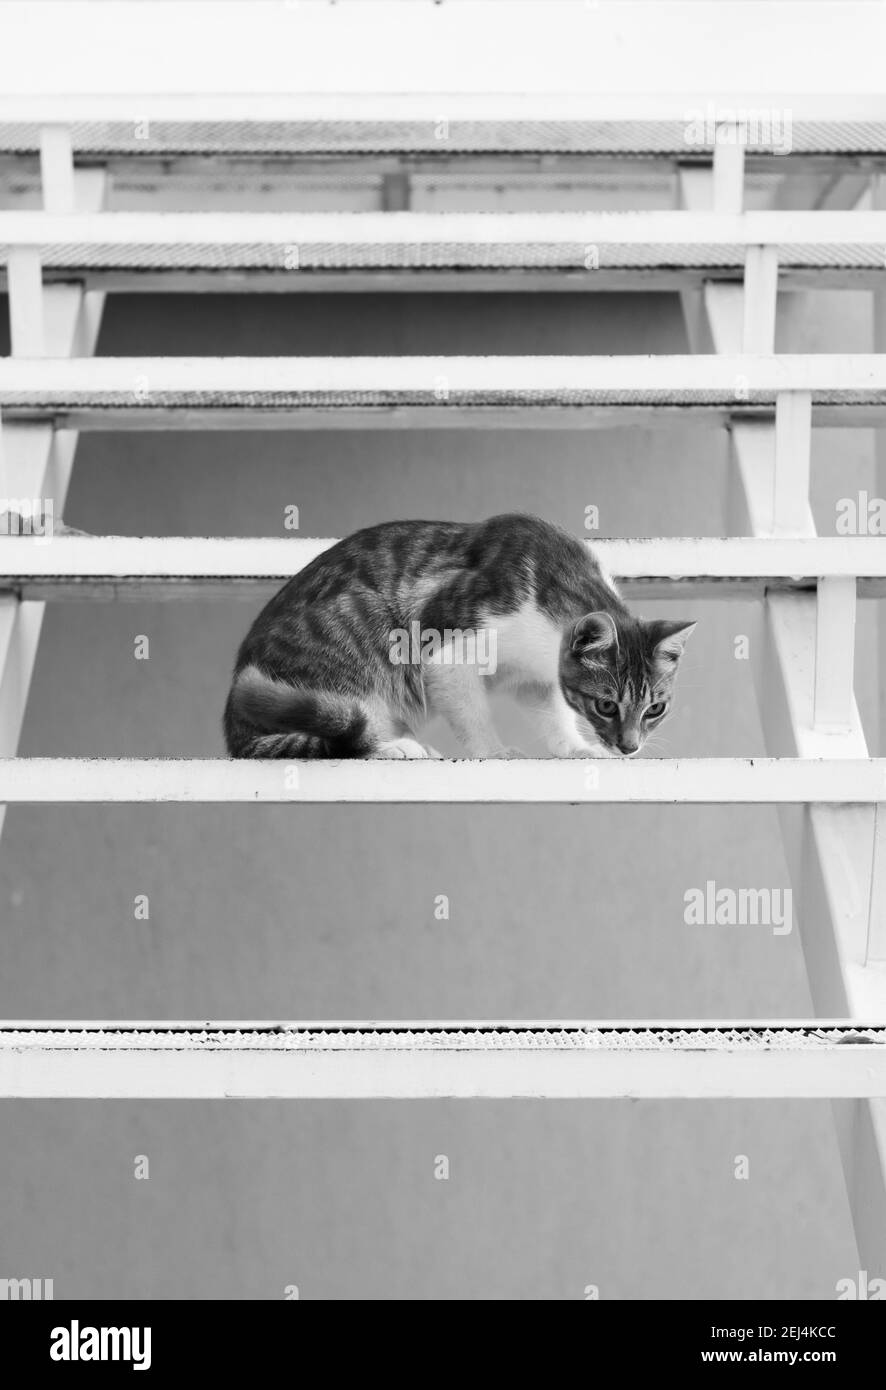 Cute, young tabby cat, sitting on the steps of a metal stairway. Stock Photo